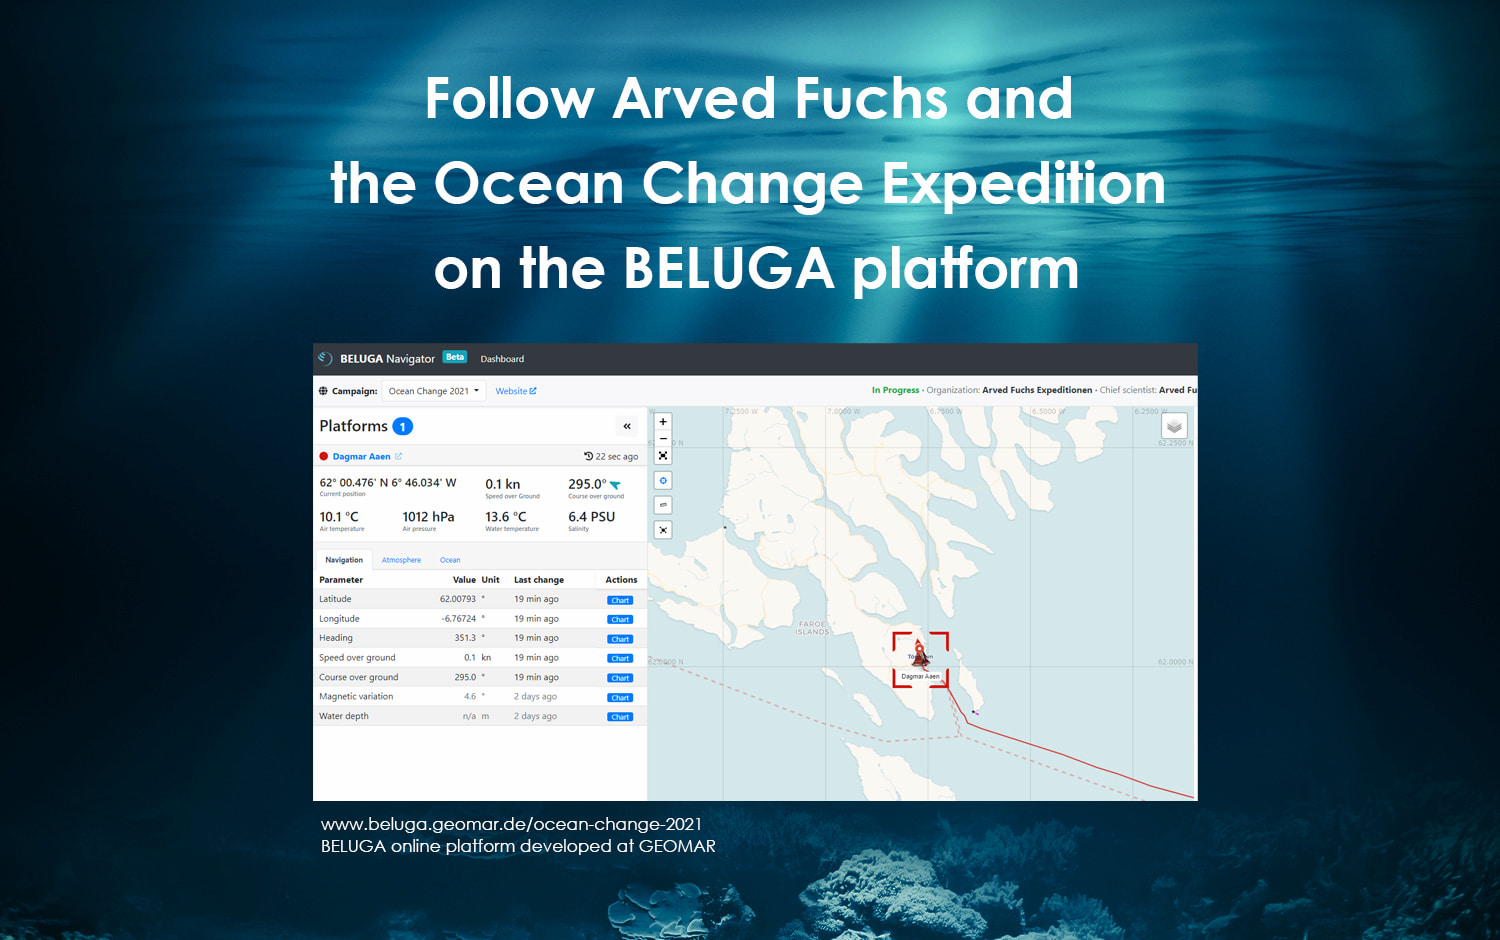 Follow Arved Fuchs and the Ocean Change Expedition on the BELUGA platform